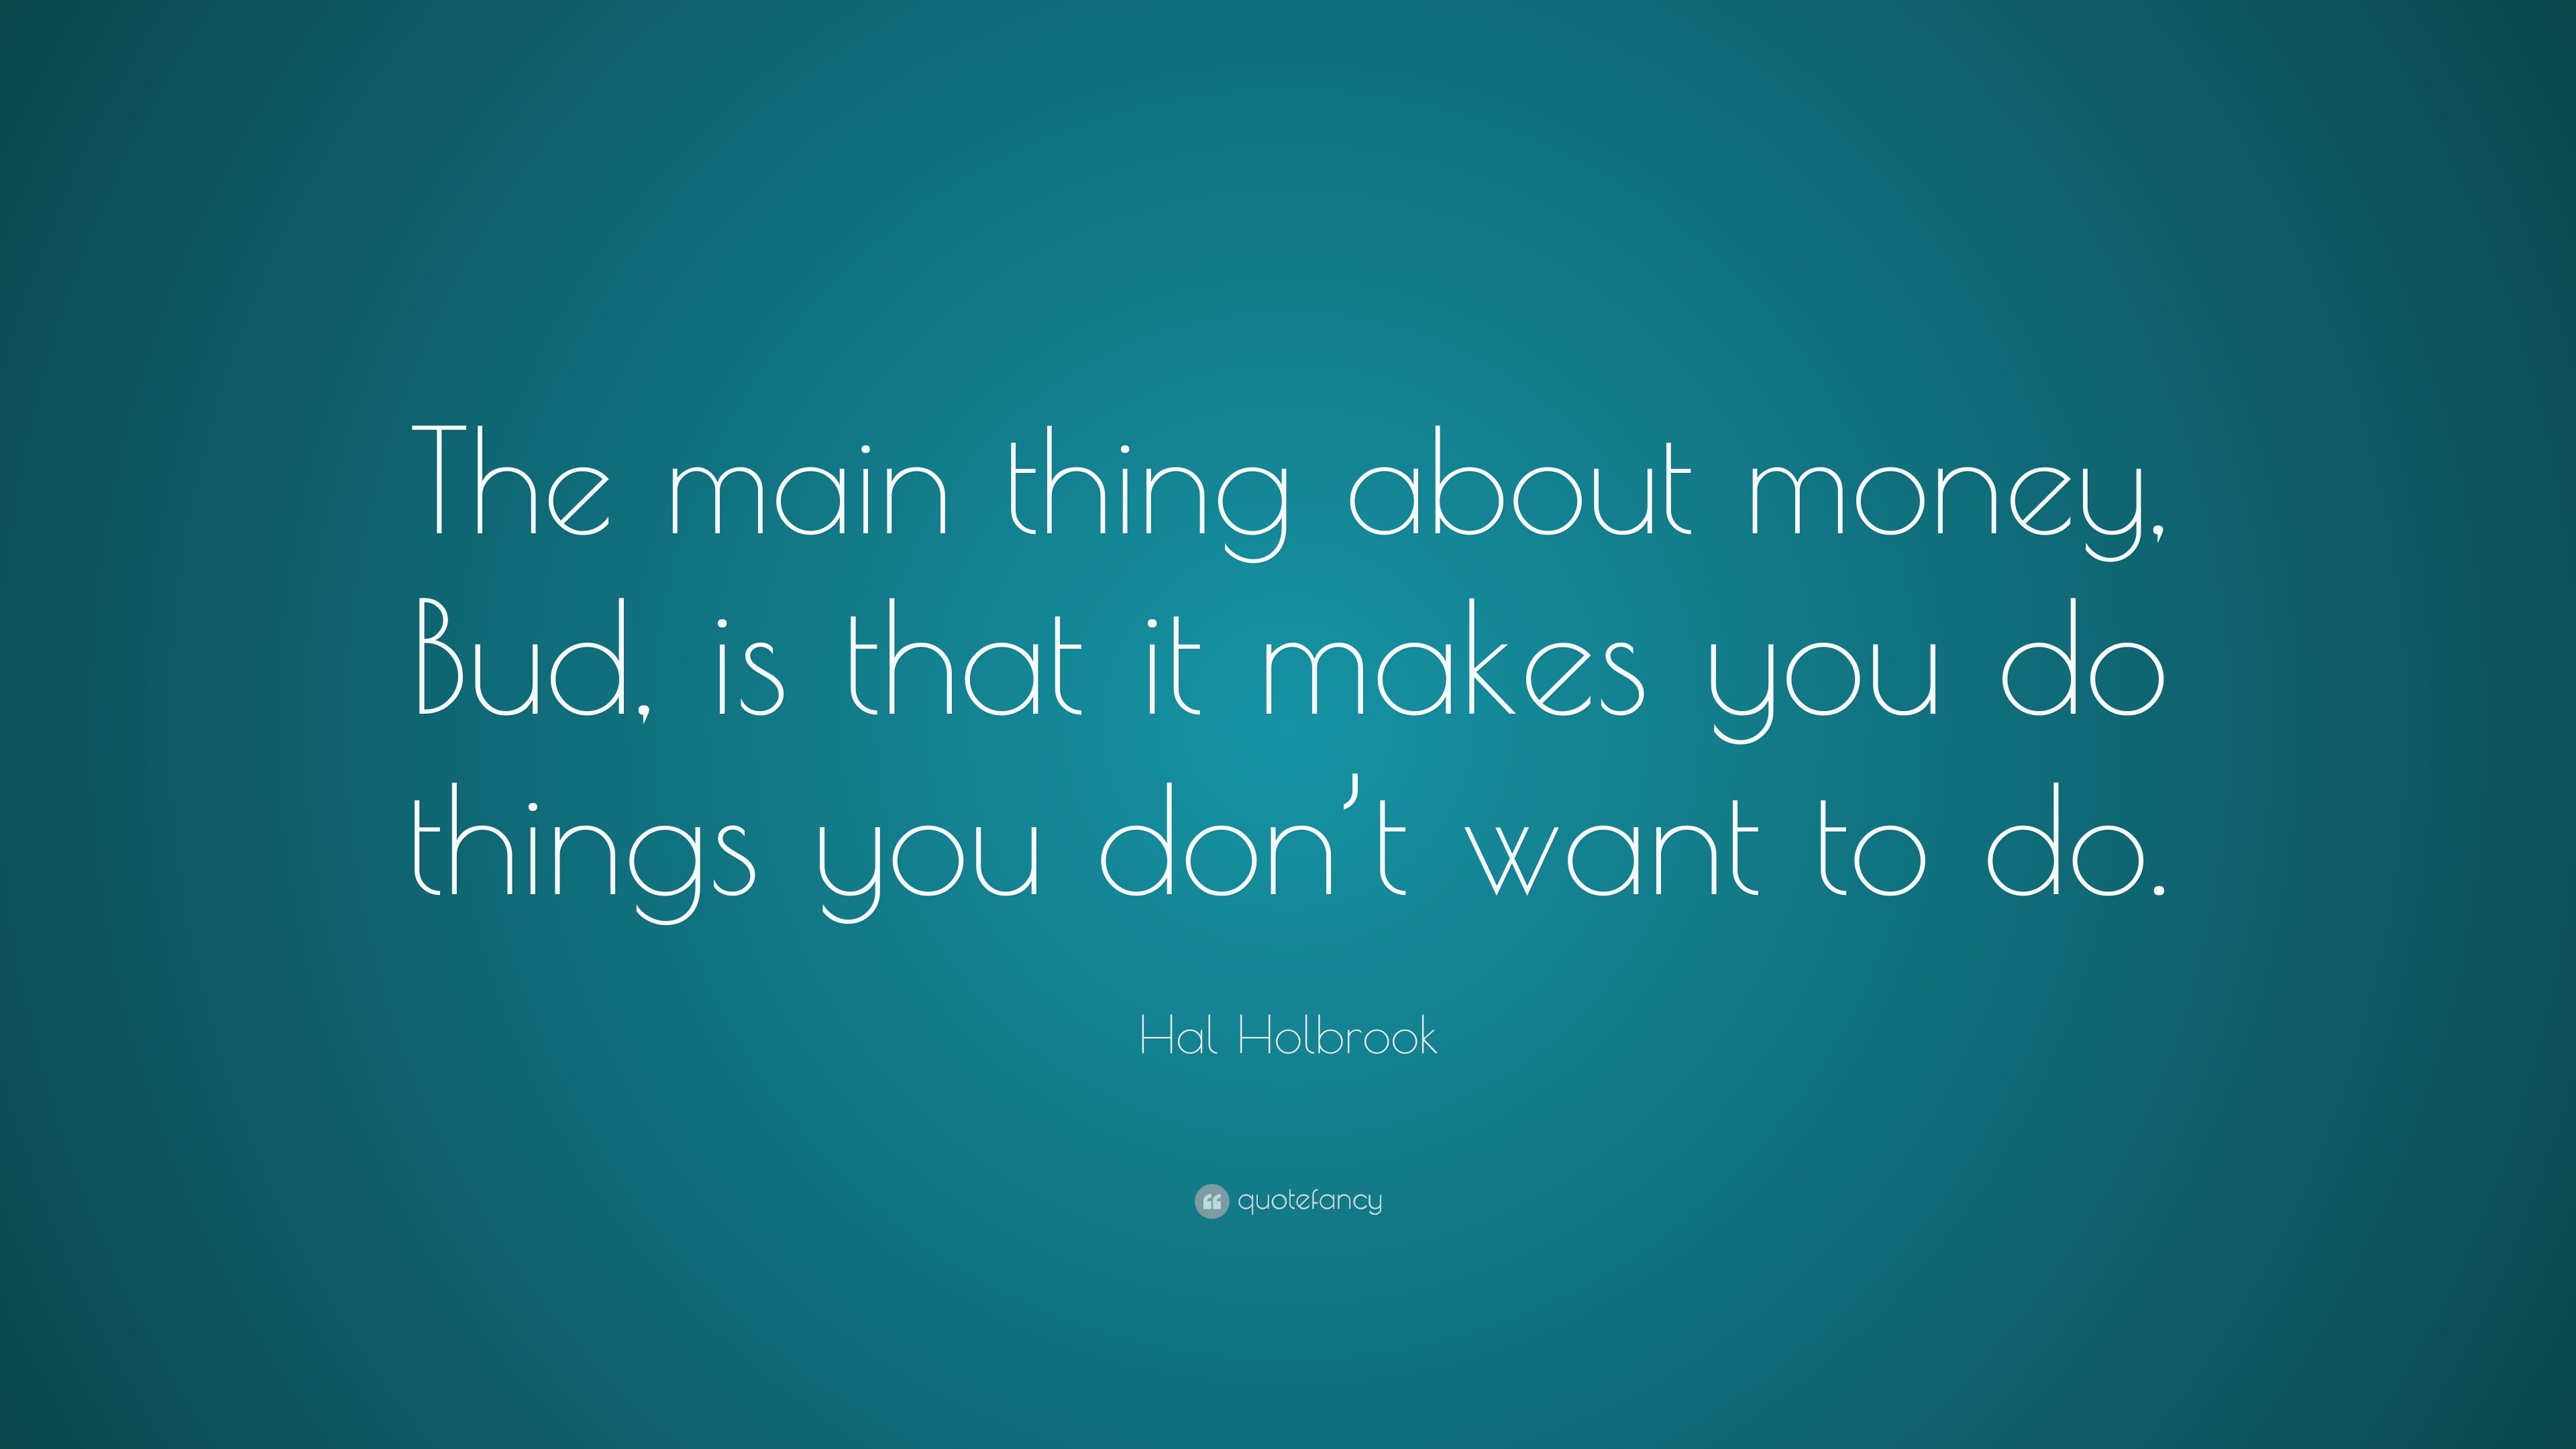 3840x2160 Hal Holbrook Quote: “The main thing about money, Bud, is that it